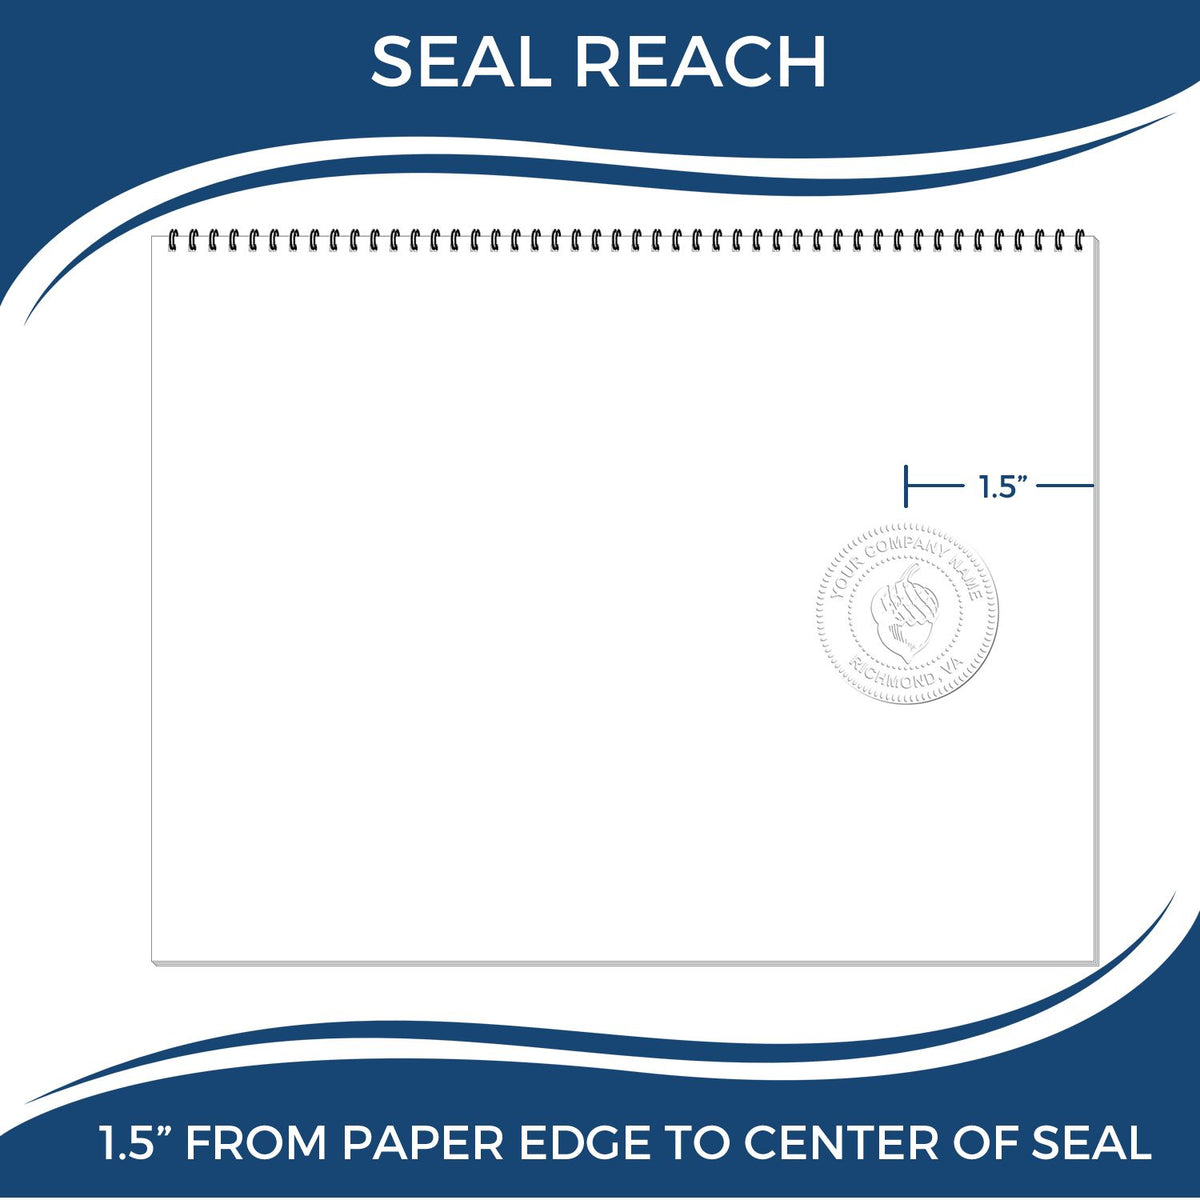 An infographic showing the seal reach which is represented by a ruler and a miniature seal image of the Oklahoma Geologist Desk Seal